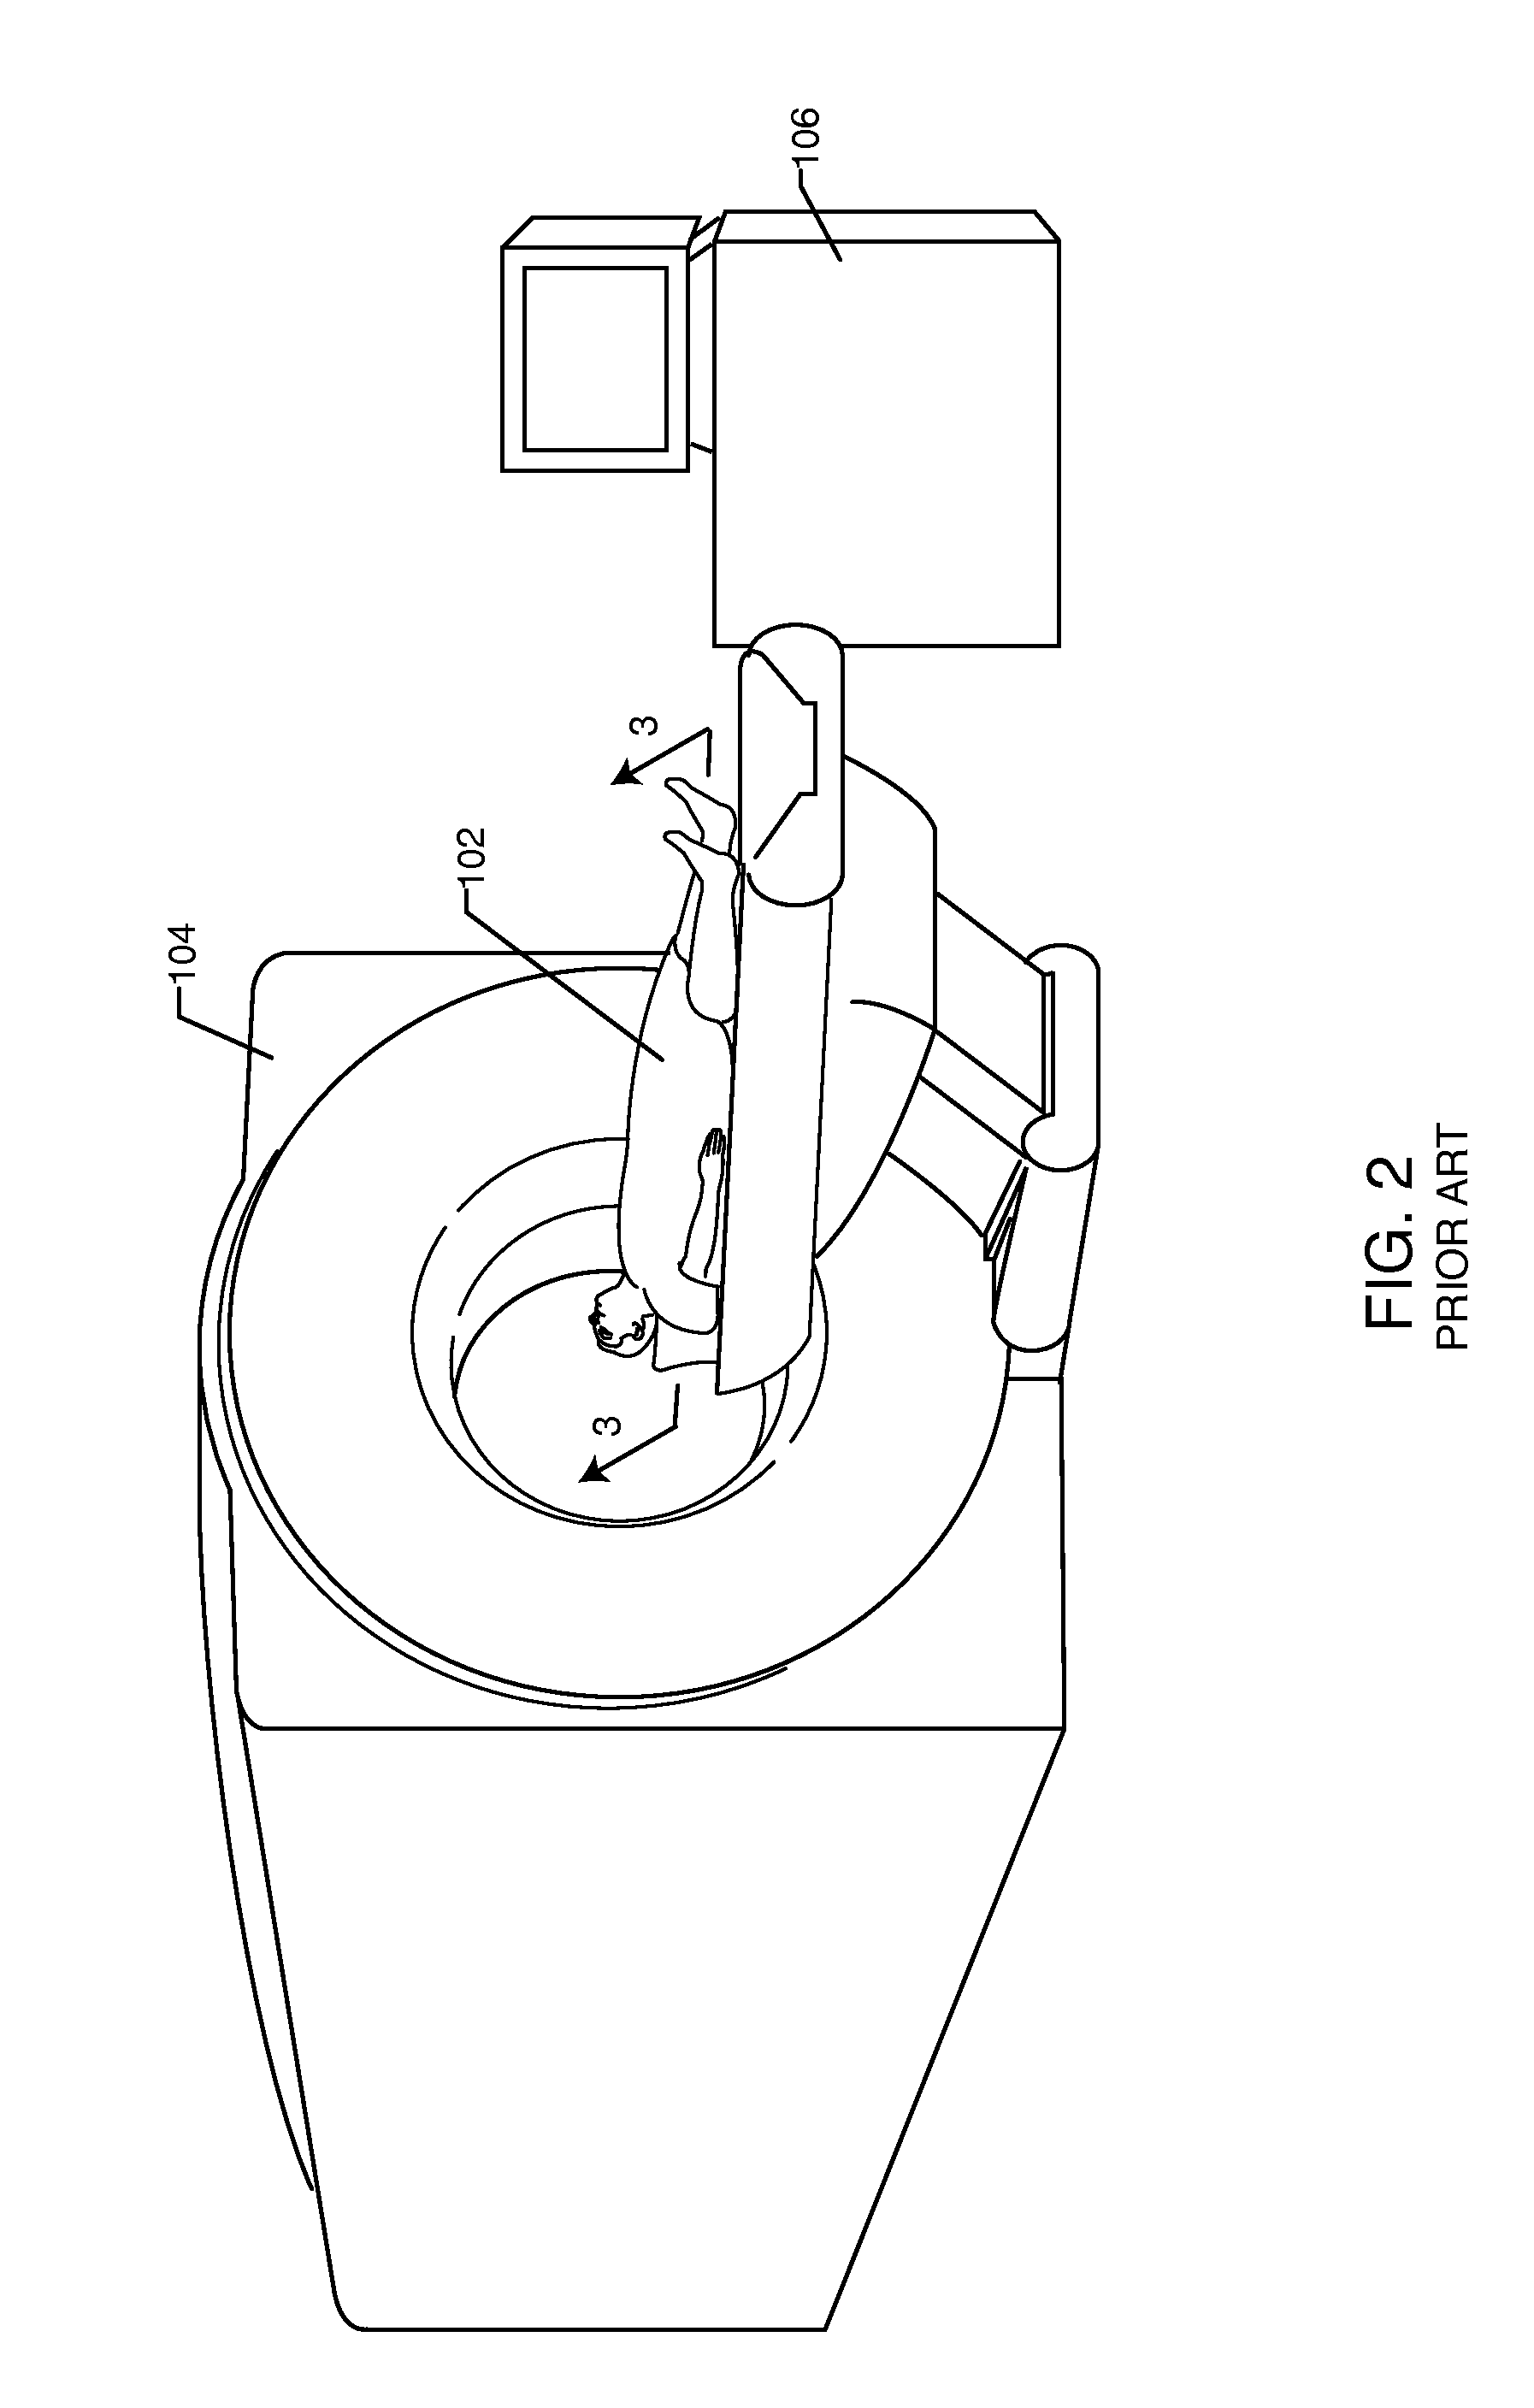 RF filter for an active medical device (AMD) for handling high RF power induced in an associated implanted lead from an external RF field